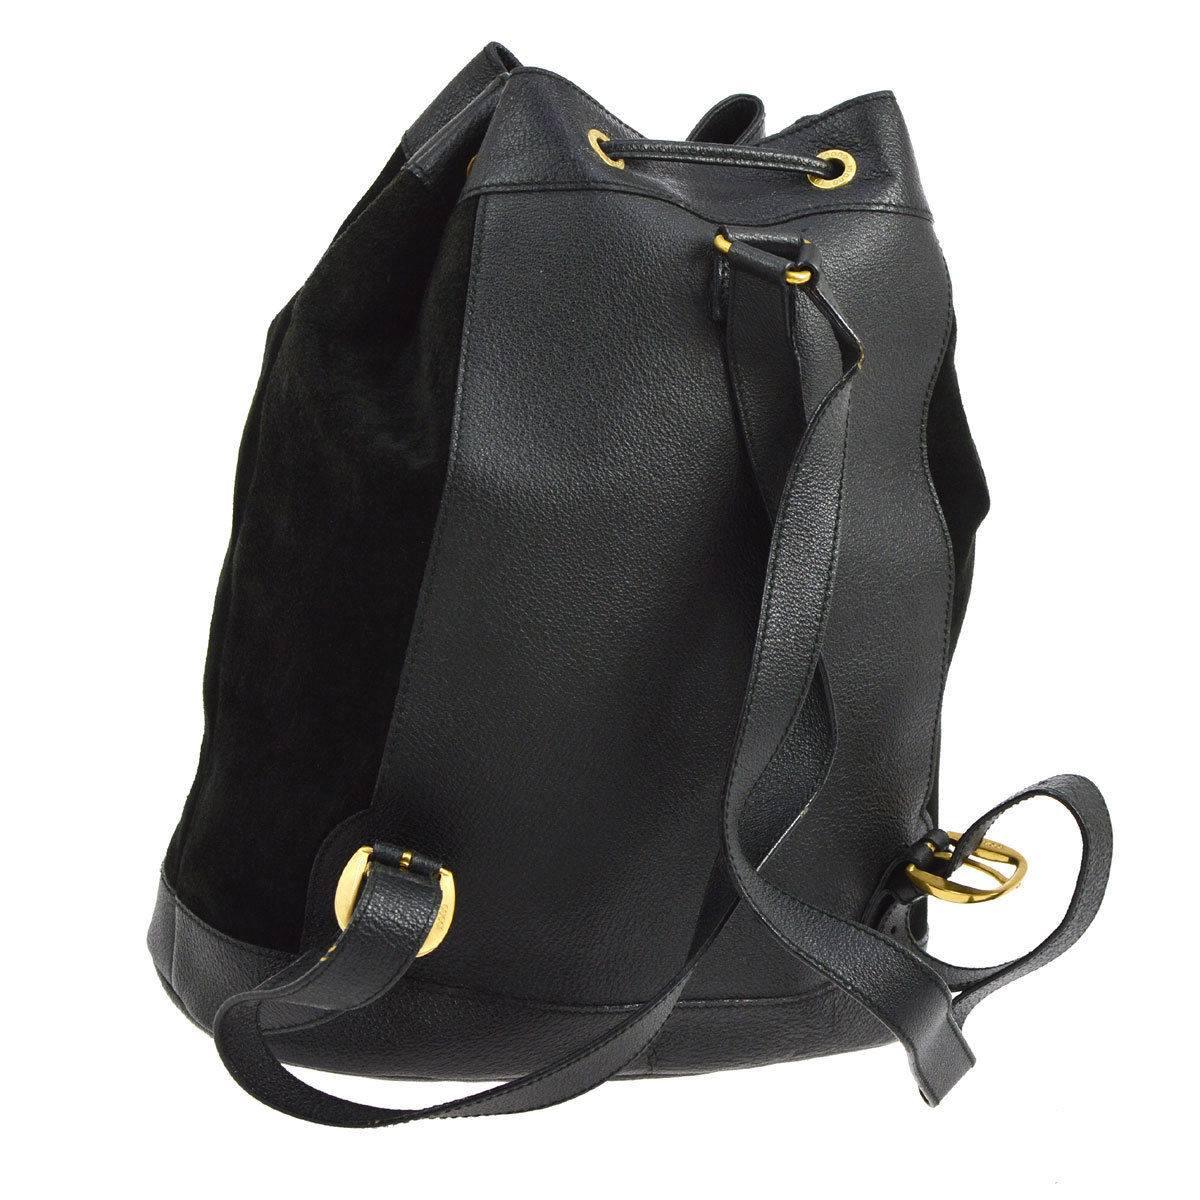 Gucci Black Suede Leather Bamboo 2 in 1 Top Handle Drawstring Shoulder Backpack Bag

Suede
Leather
Bamboo
Gold tone hardware
Woven lining
Made in Italy 
Handle drop 3